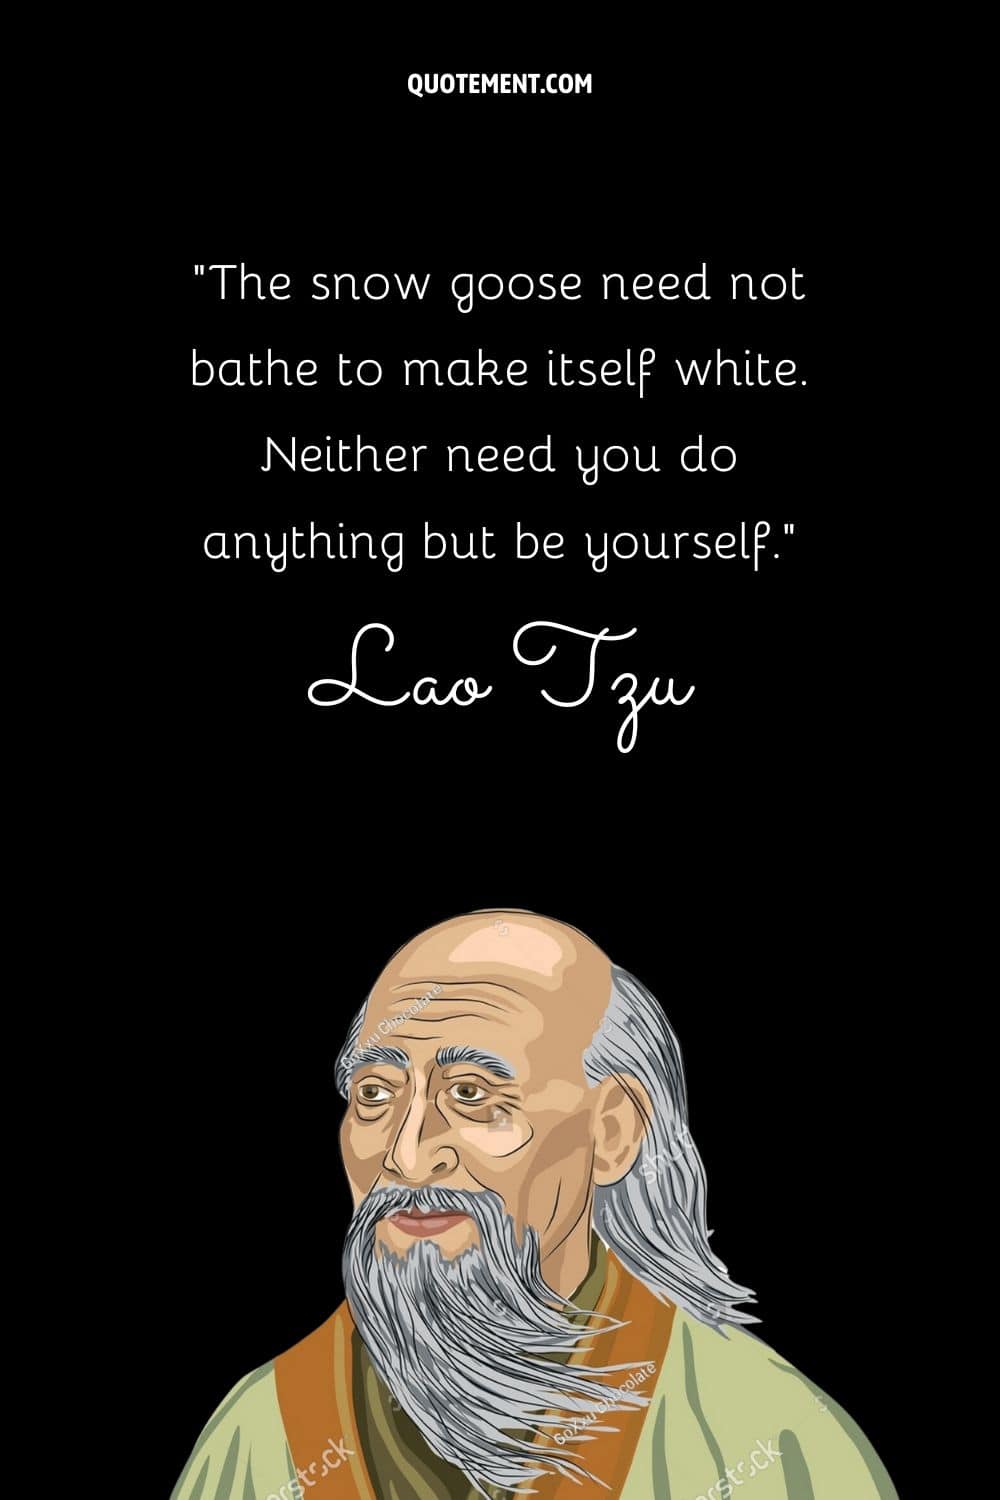 The snow goose need not bathe to make itself white. Neither need you do anything but be yourself